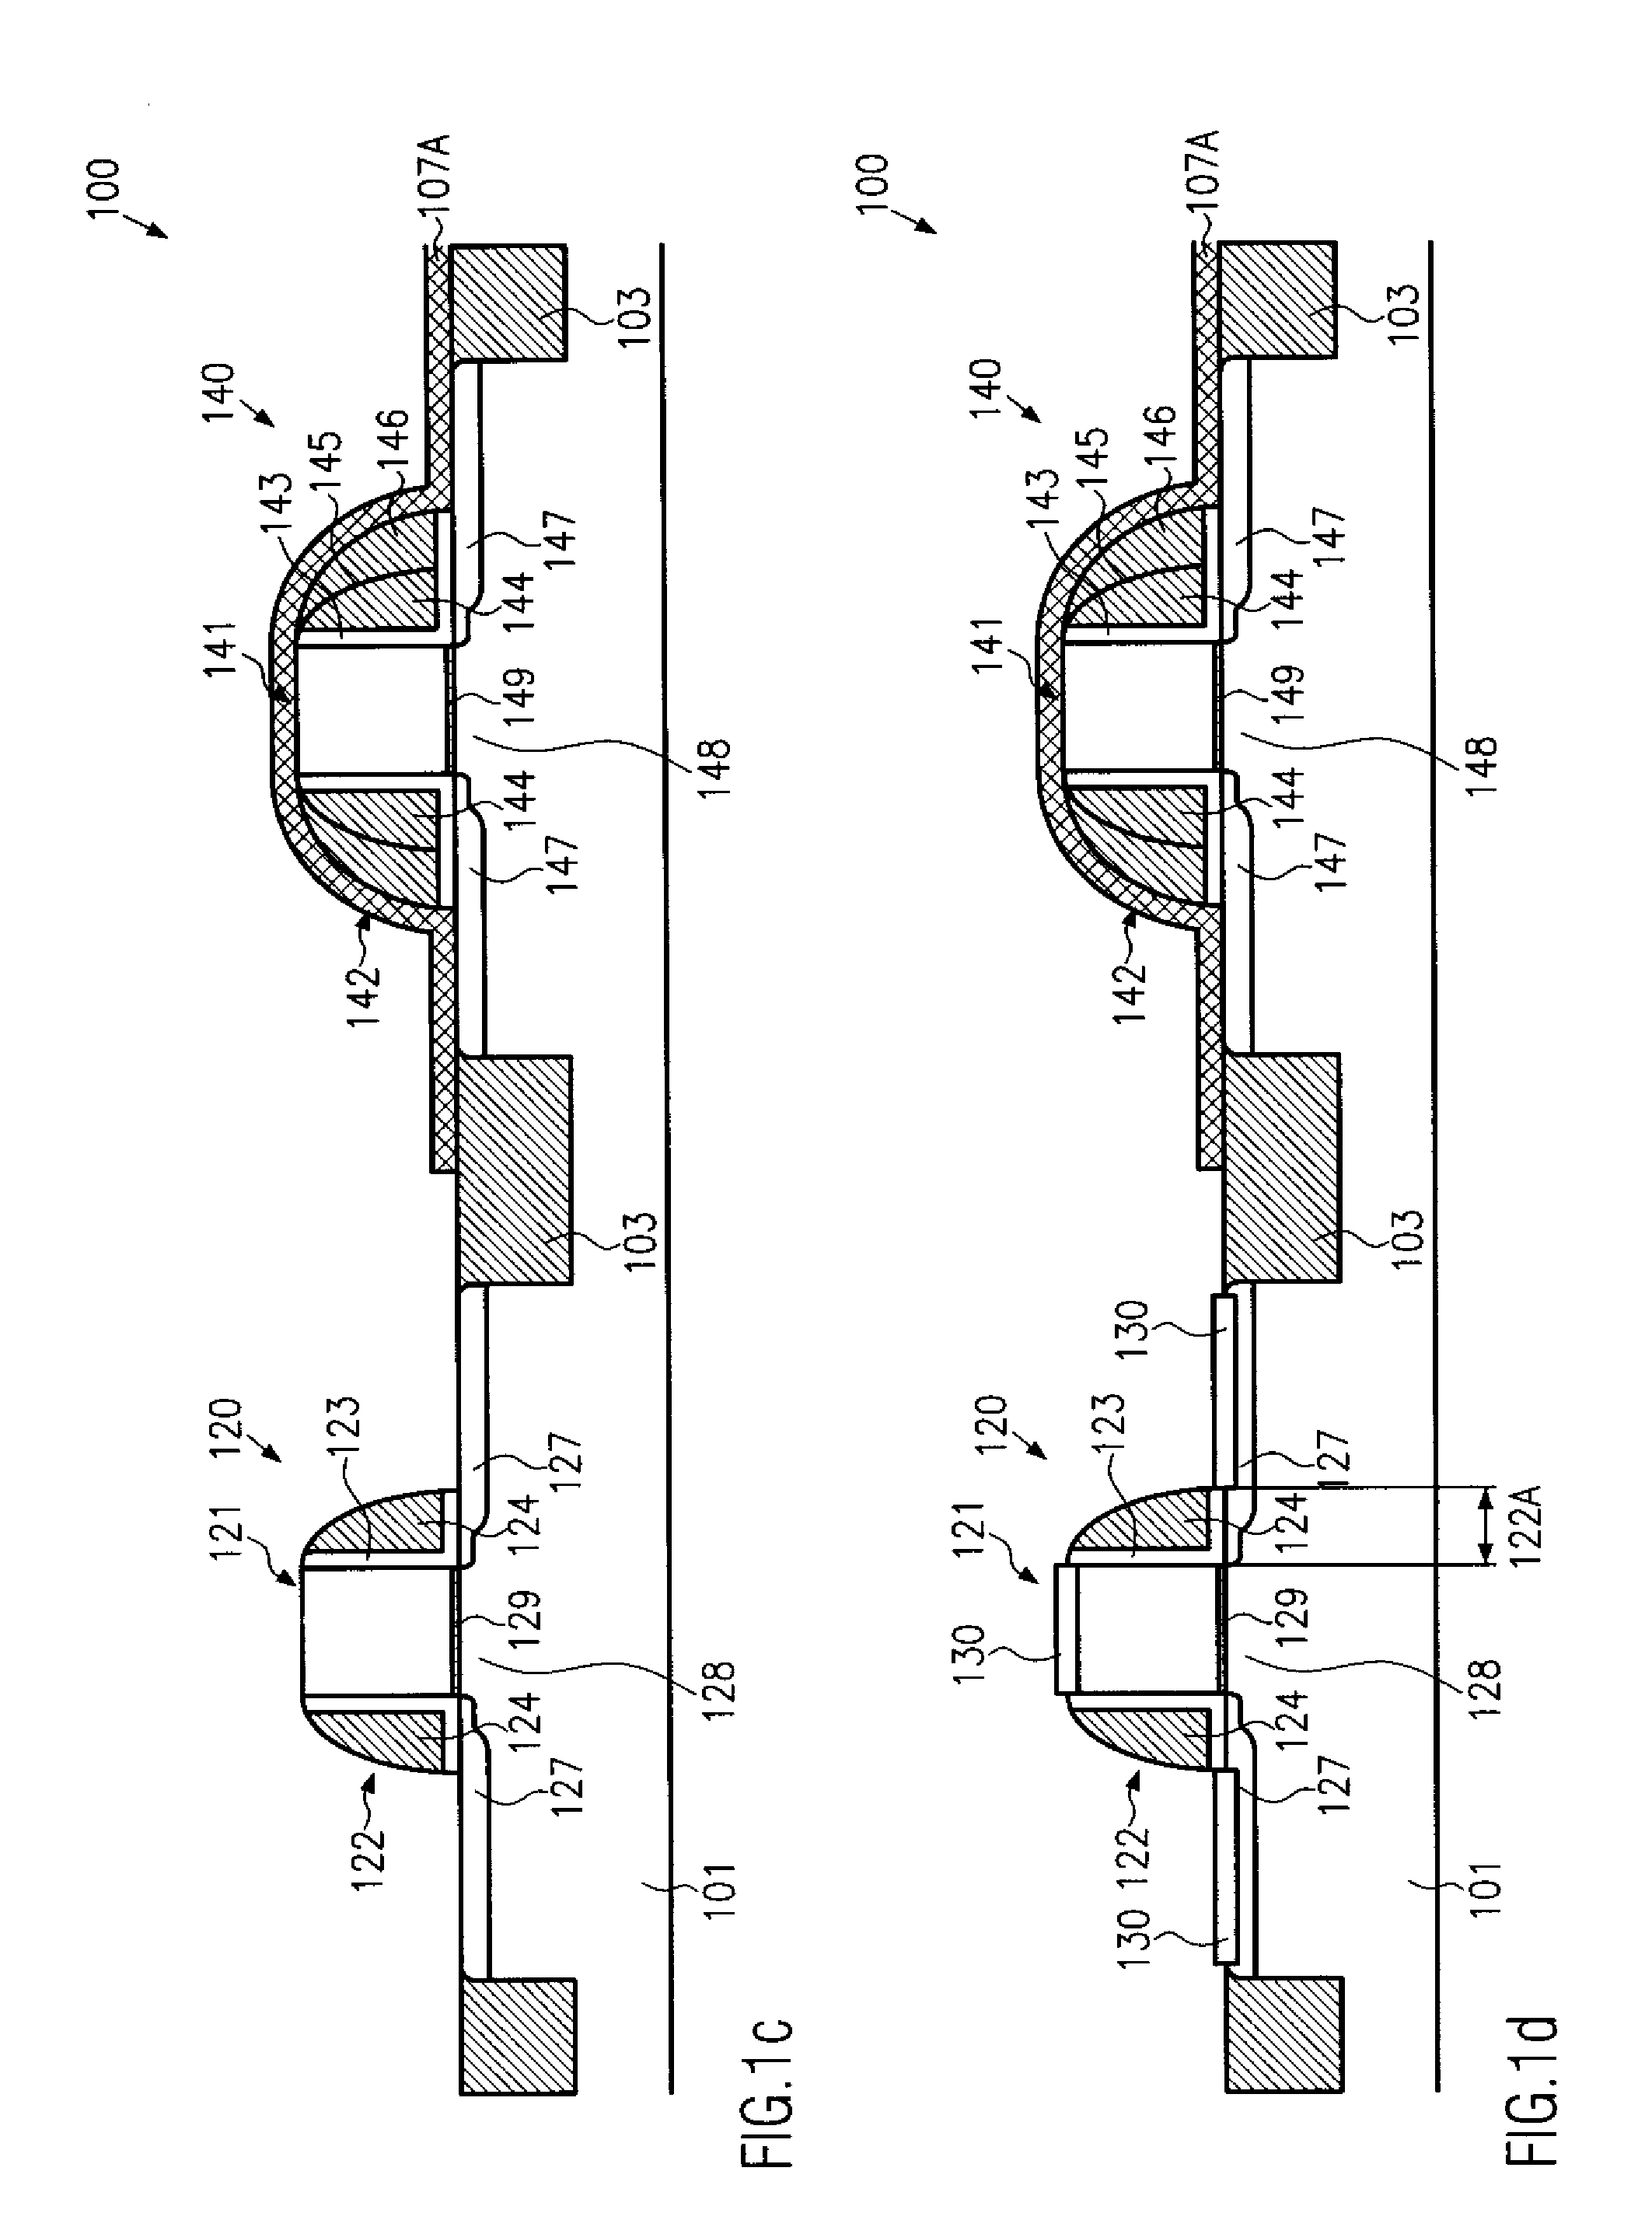 Technique for forming contact insulation layers and silicide regions with different characteristics